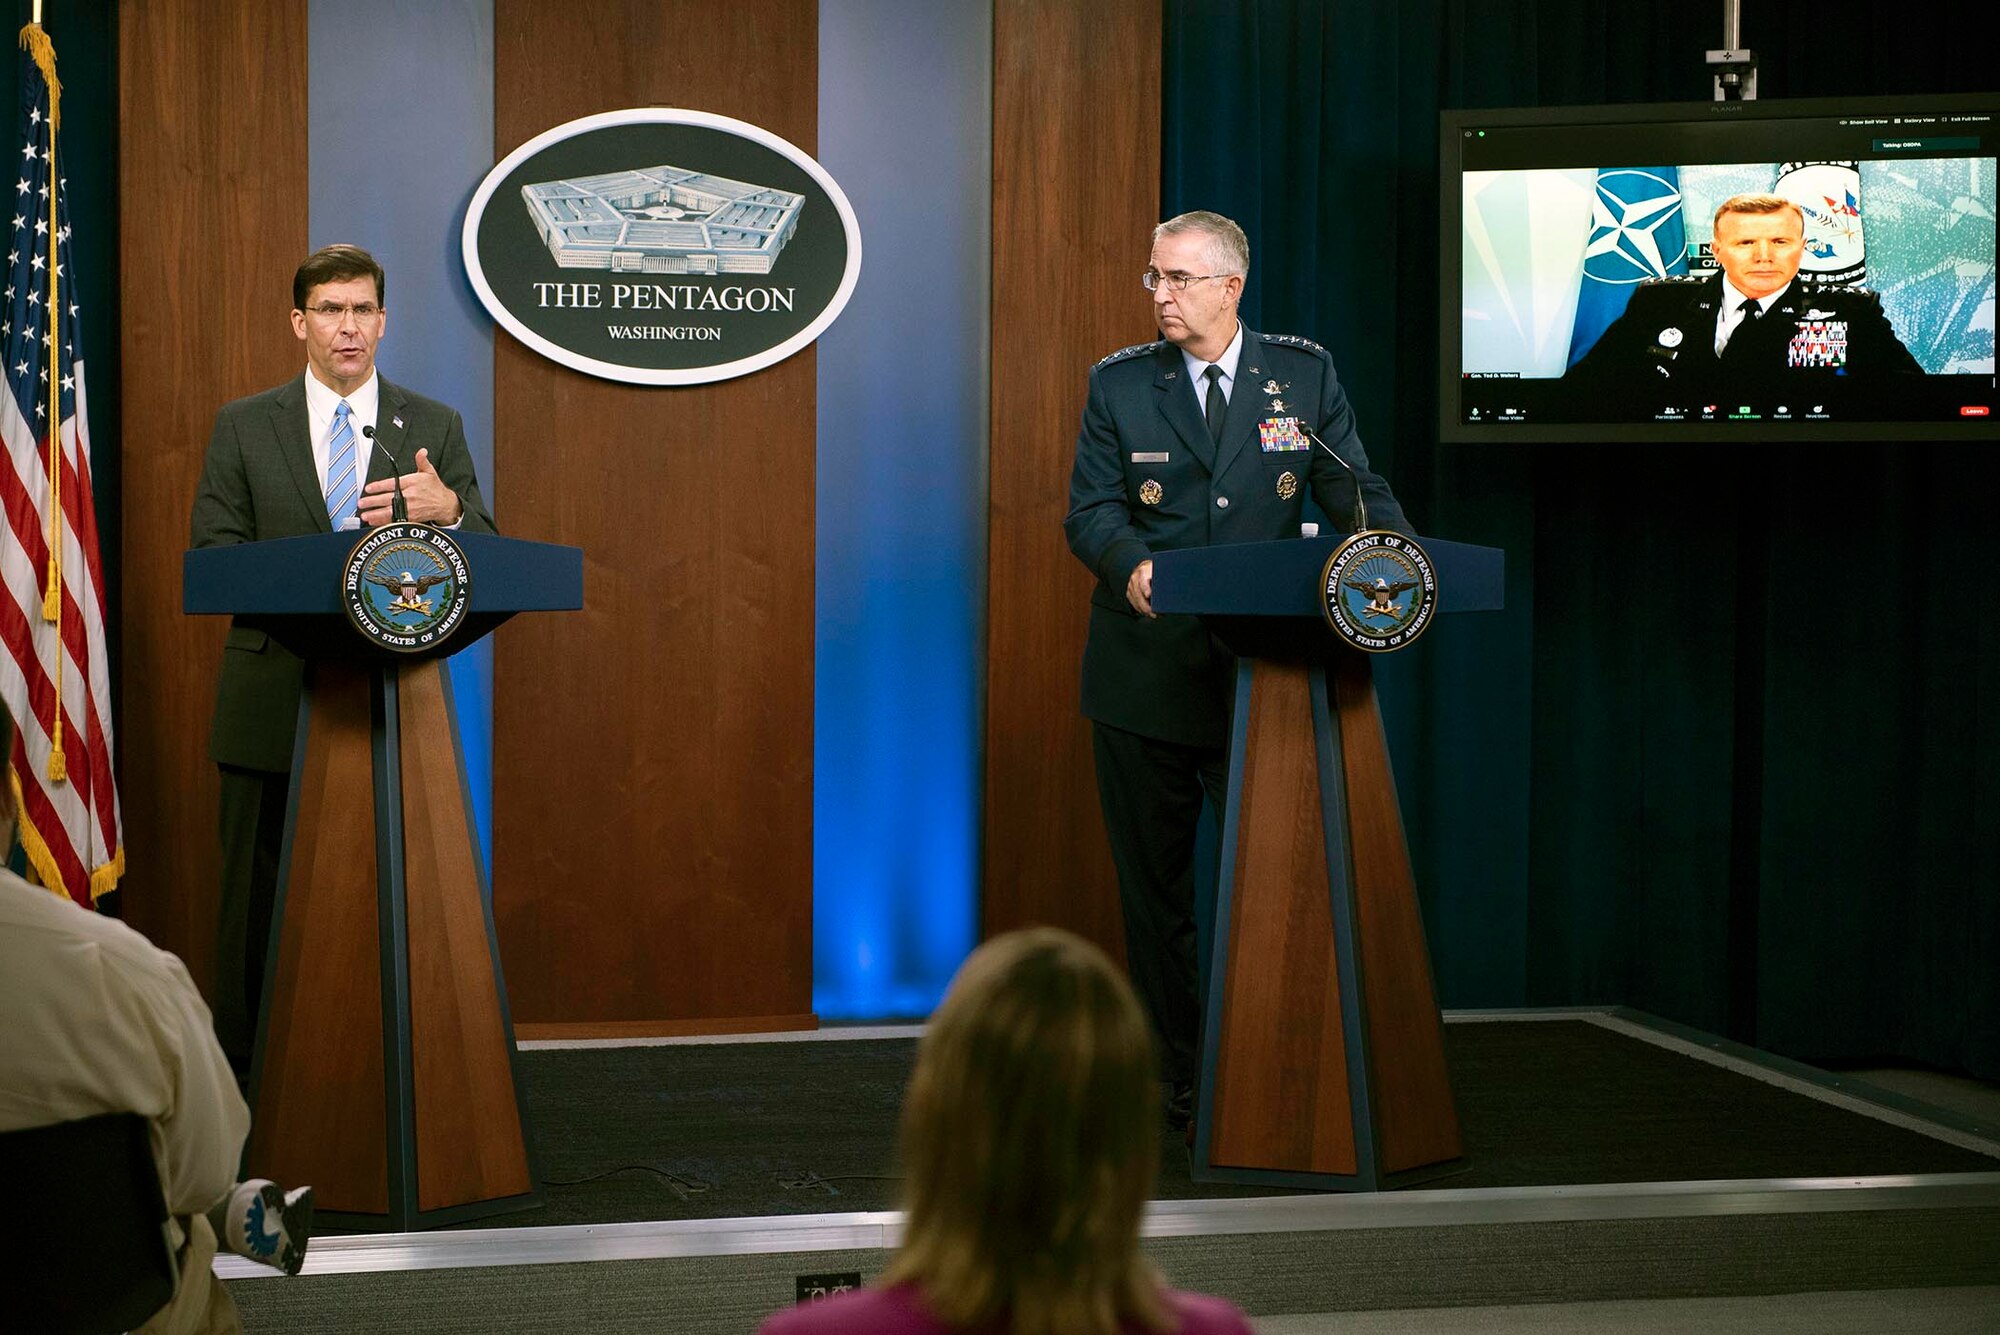 Secretary of Defense Mark T. Esper, Joint Chiefs of Staff Vice Chairman Air Force Gen. John E. Hyten, and Commander, U.S. European Command Air Force Gen. Tod D. Wolters, brief the media on the European Strategic Force Posture Review from the Pentagon Briefing Room, Washington, D.C., July 29, 2020.